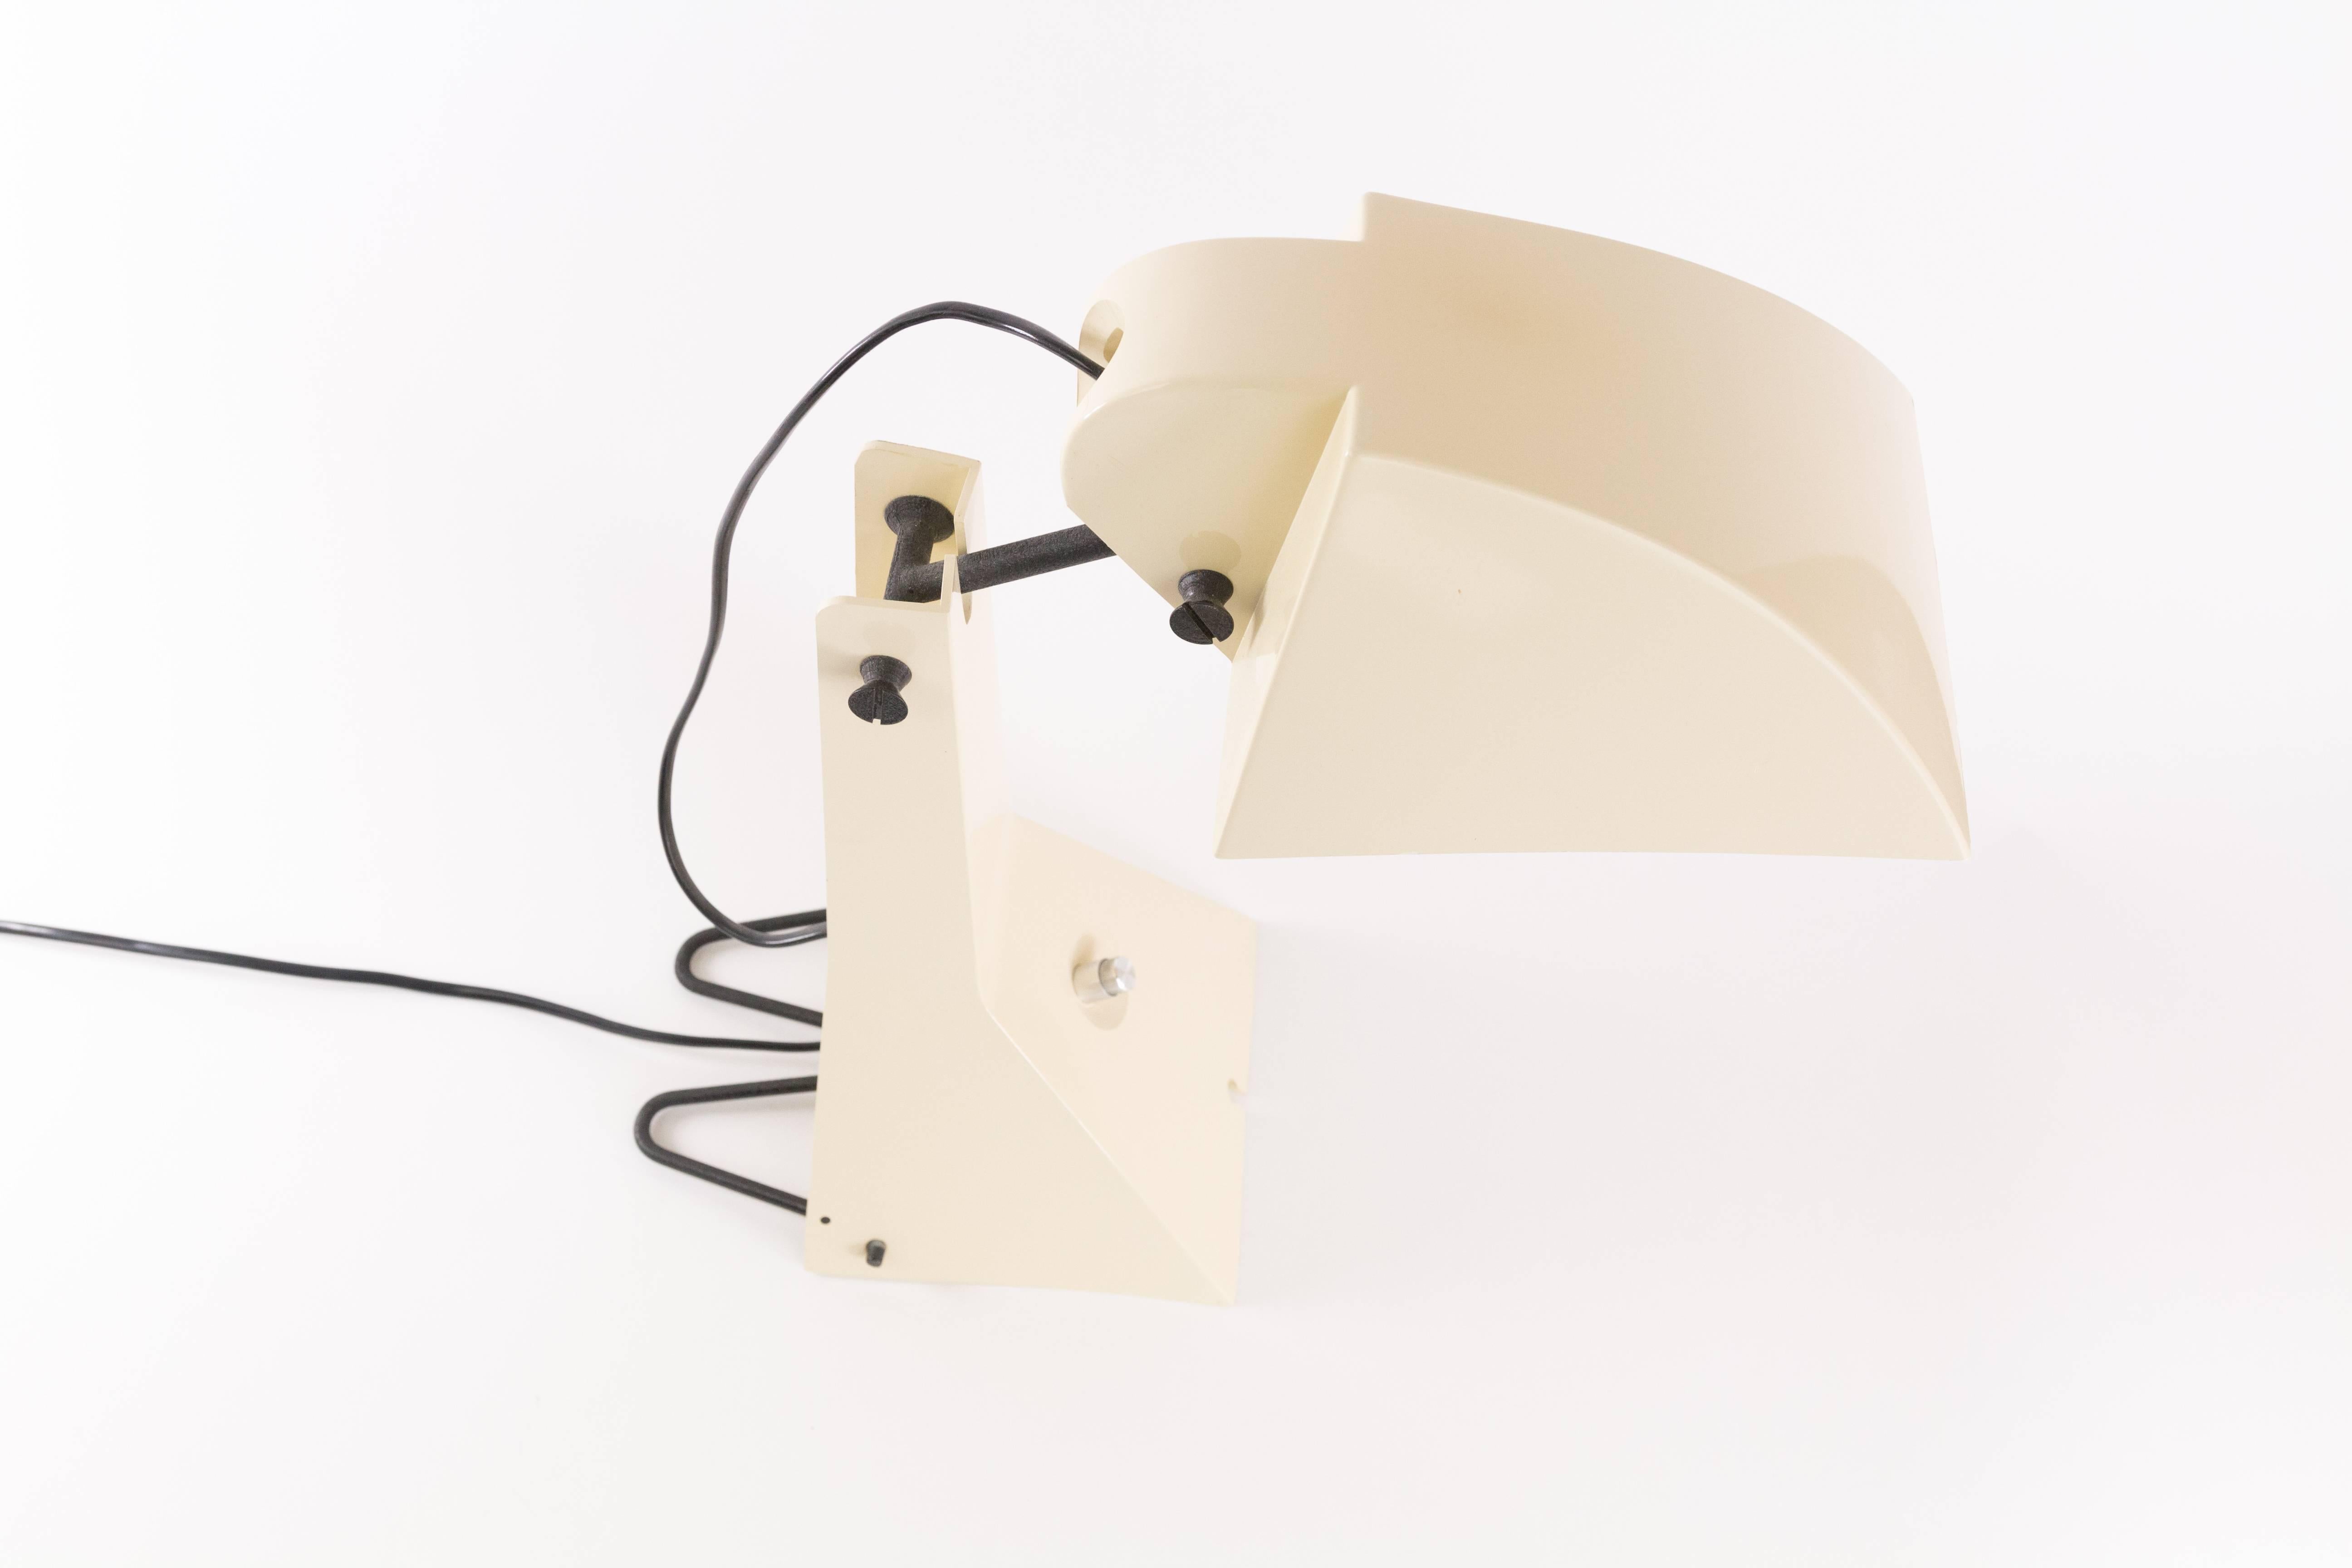 The E63 (or also known as Robot or Ruspa) lamp was designed by Umberto Riva in 1963 for a competition and taken into production as of 1969 by different manufacturers (Bieffeplast and Fontana Arte).

This incomparable and unique model with